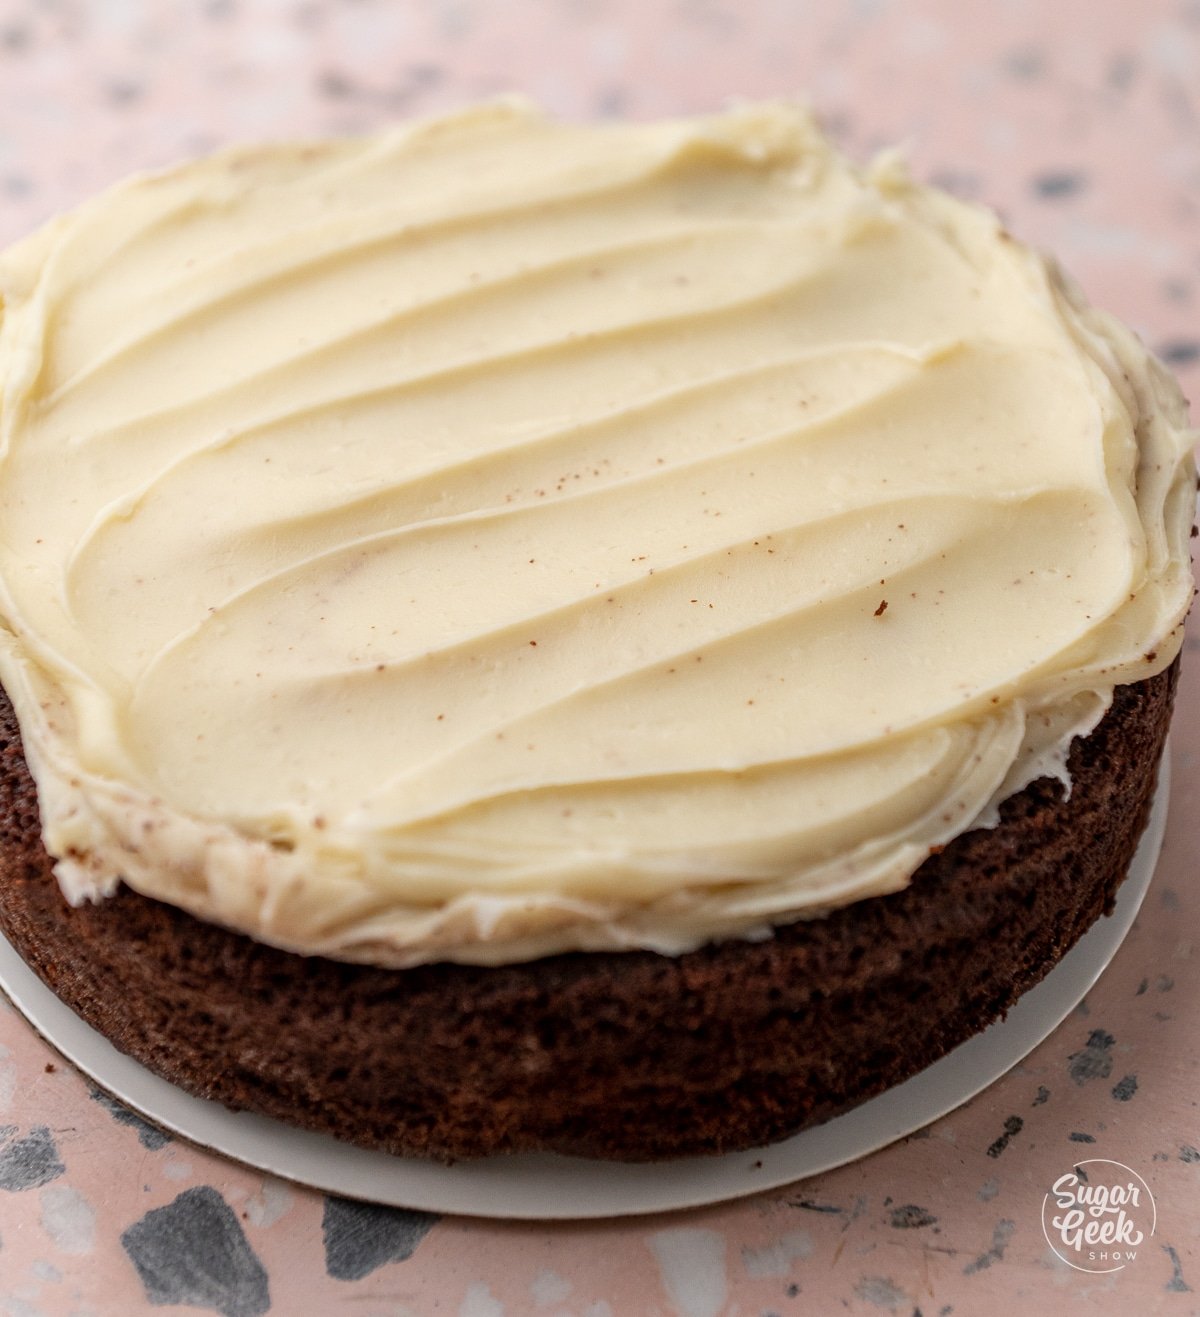 white chocolate ganache spread on top of a layer of chocolate cake